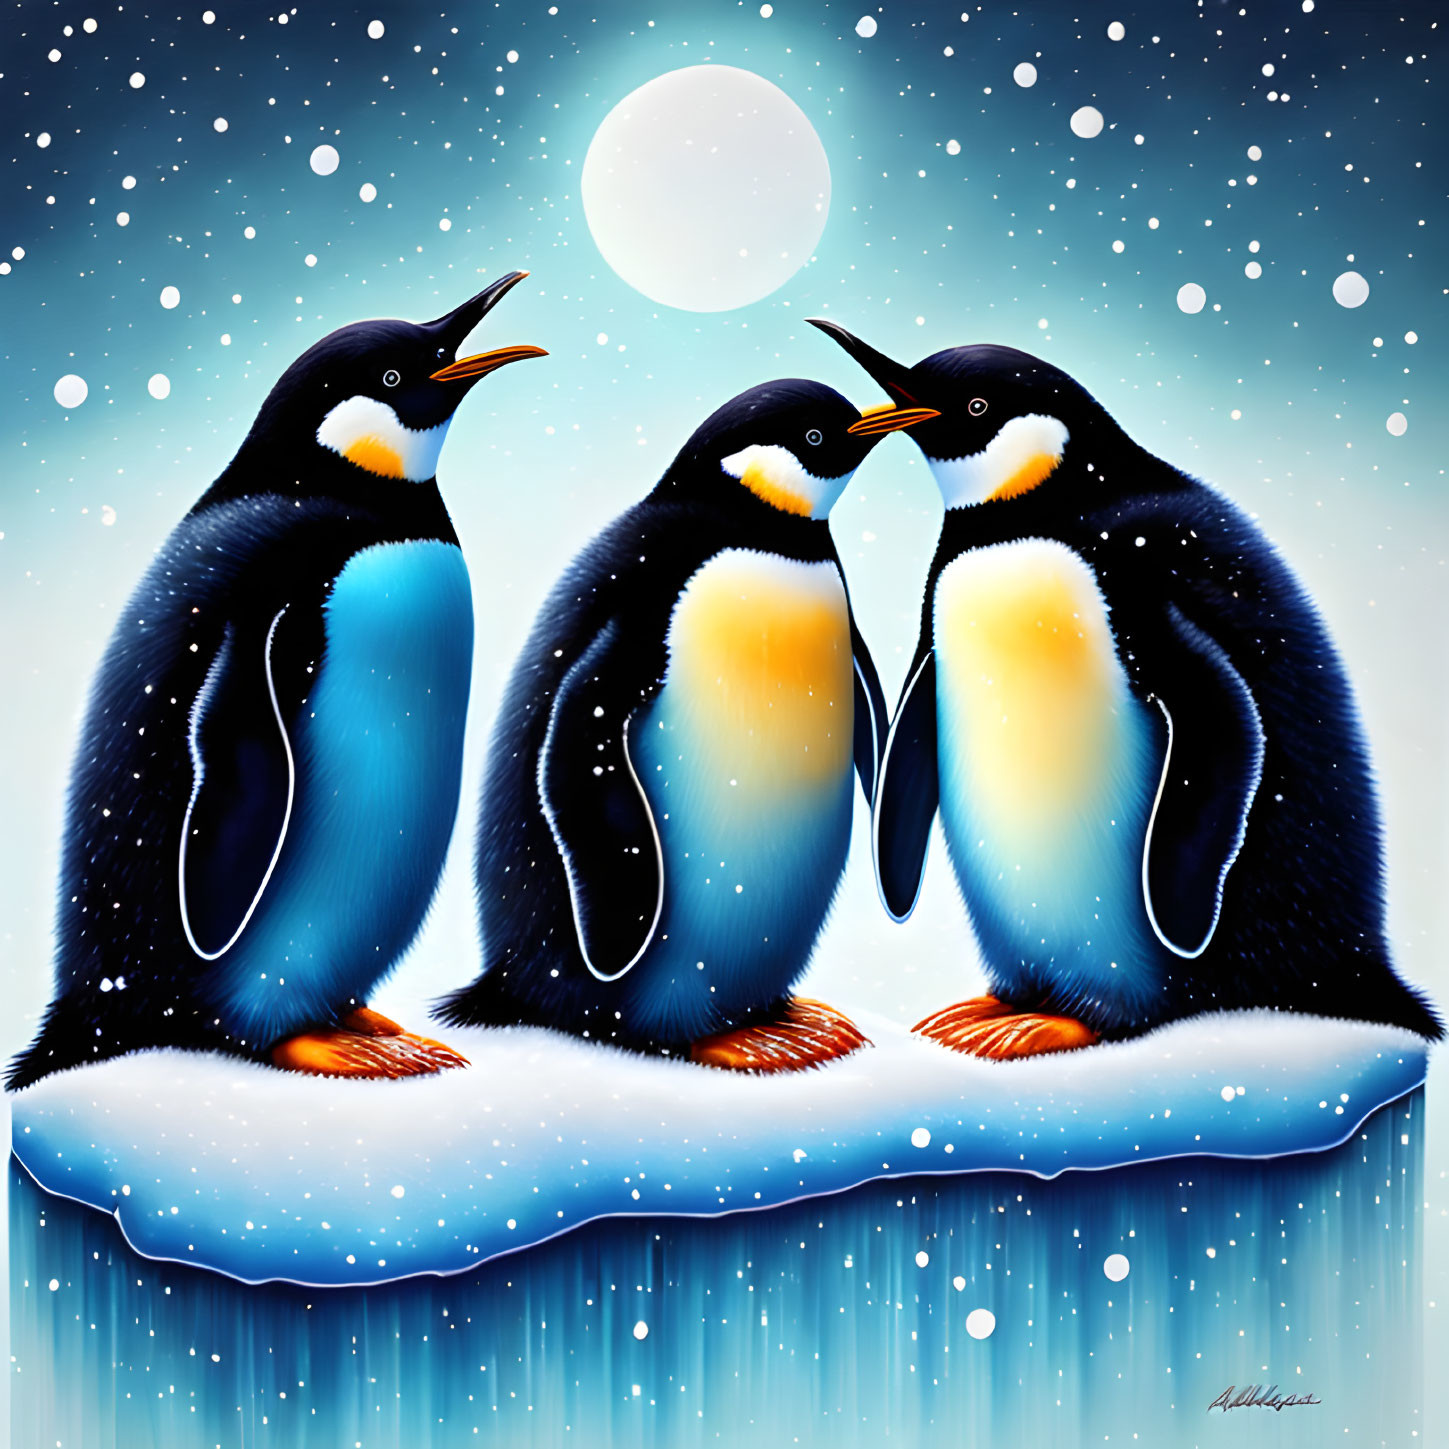 Stylized penguins on ice under full moon and snowflakes